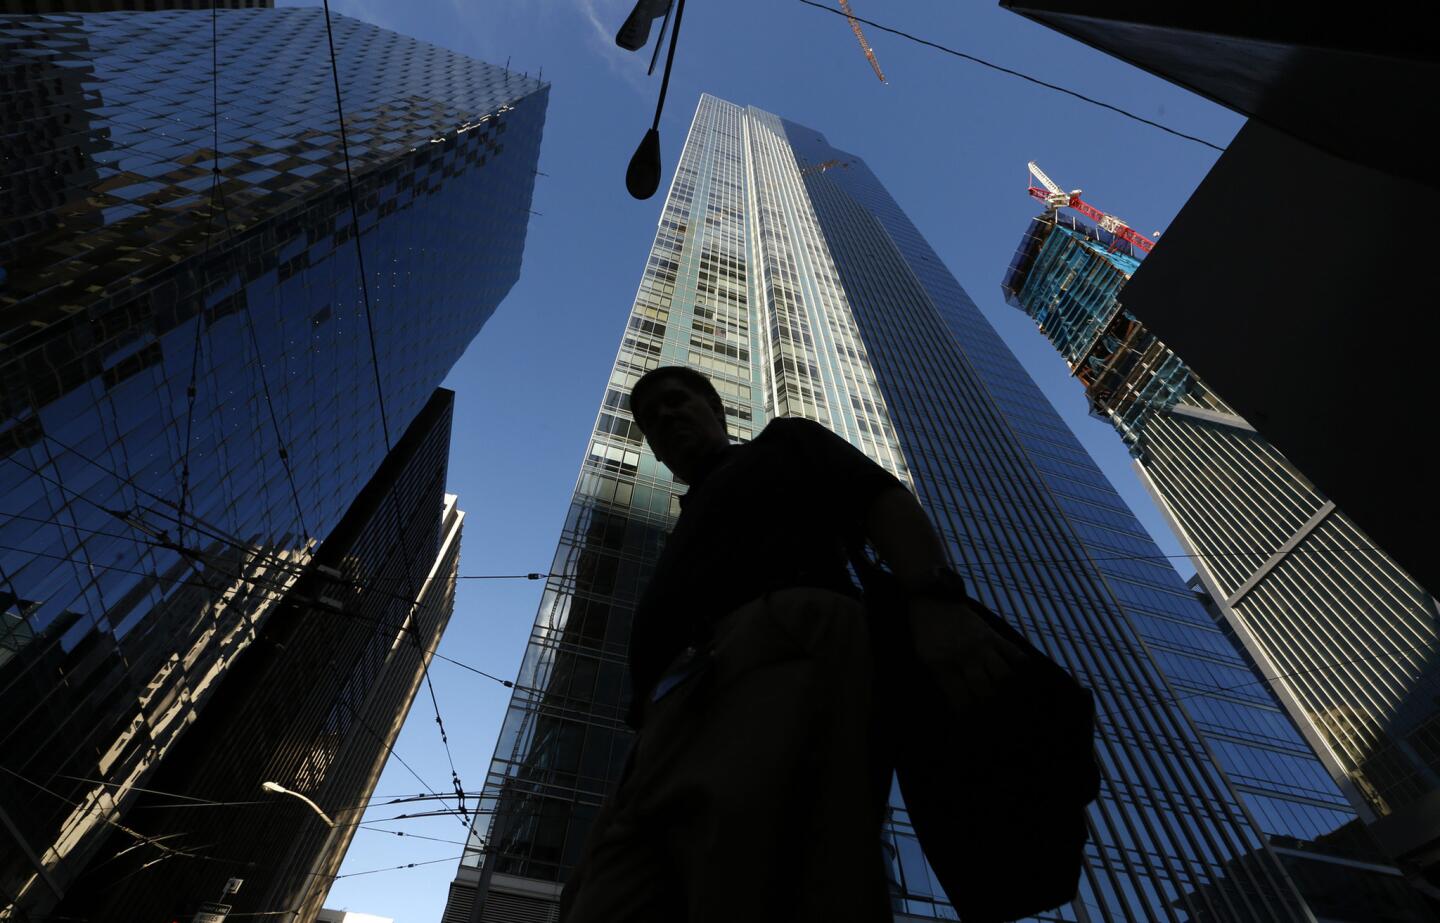 A pedestrian walks past the luxury Millennium Tower, a 58-story high rise in San Francisco.